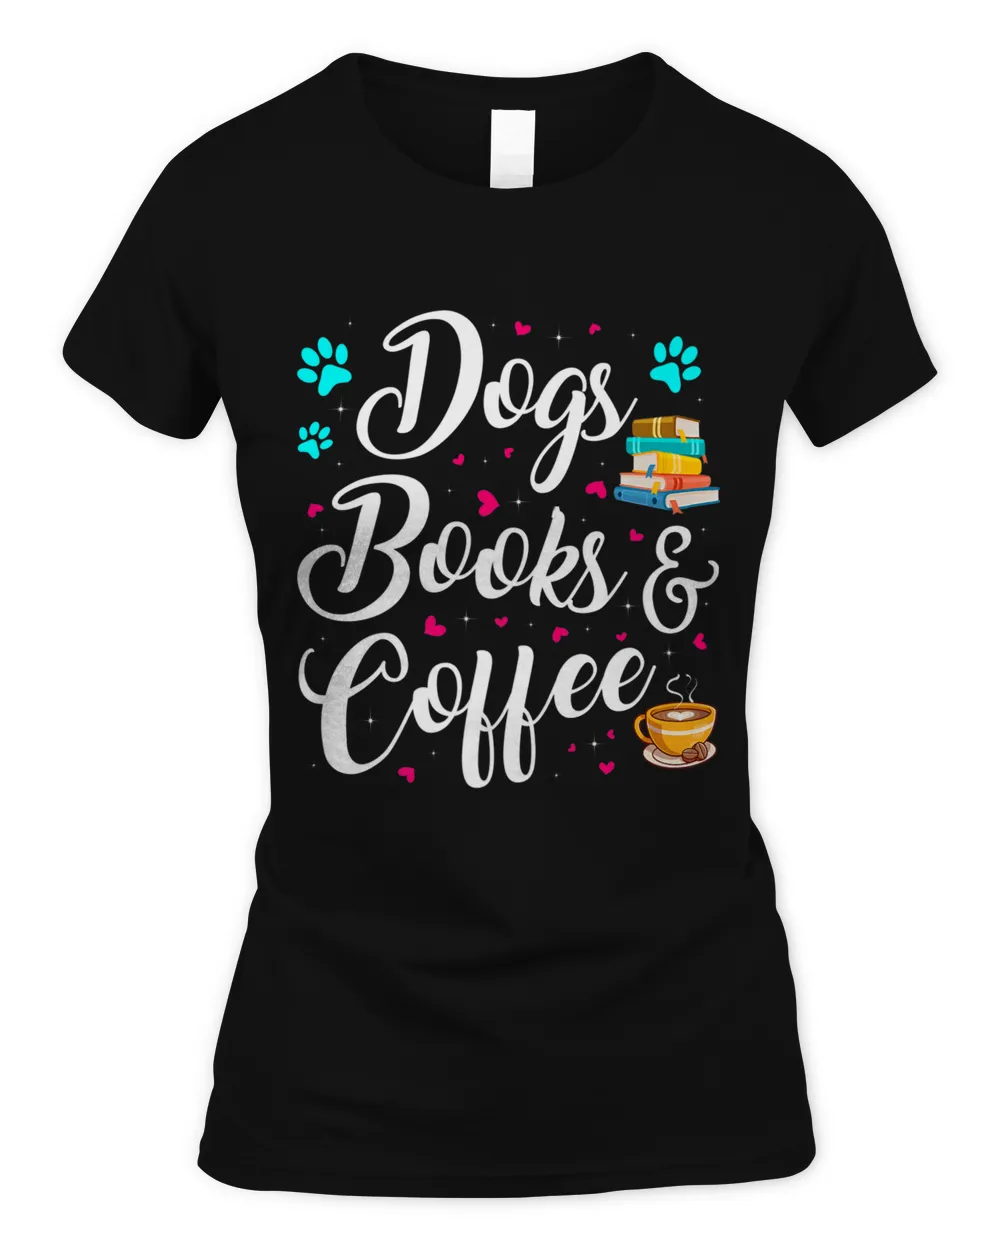 Dogs Books Coffee Funny Dog Lover Book Lover Readers Premium T-shirt